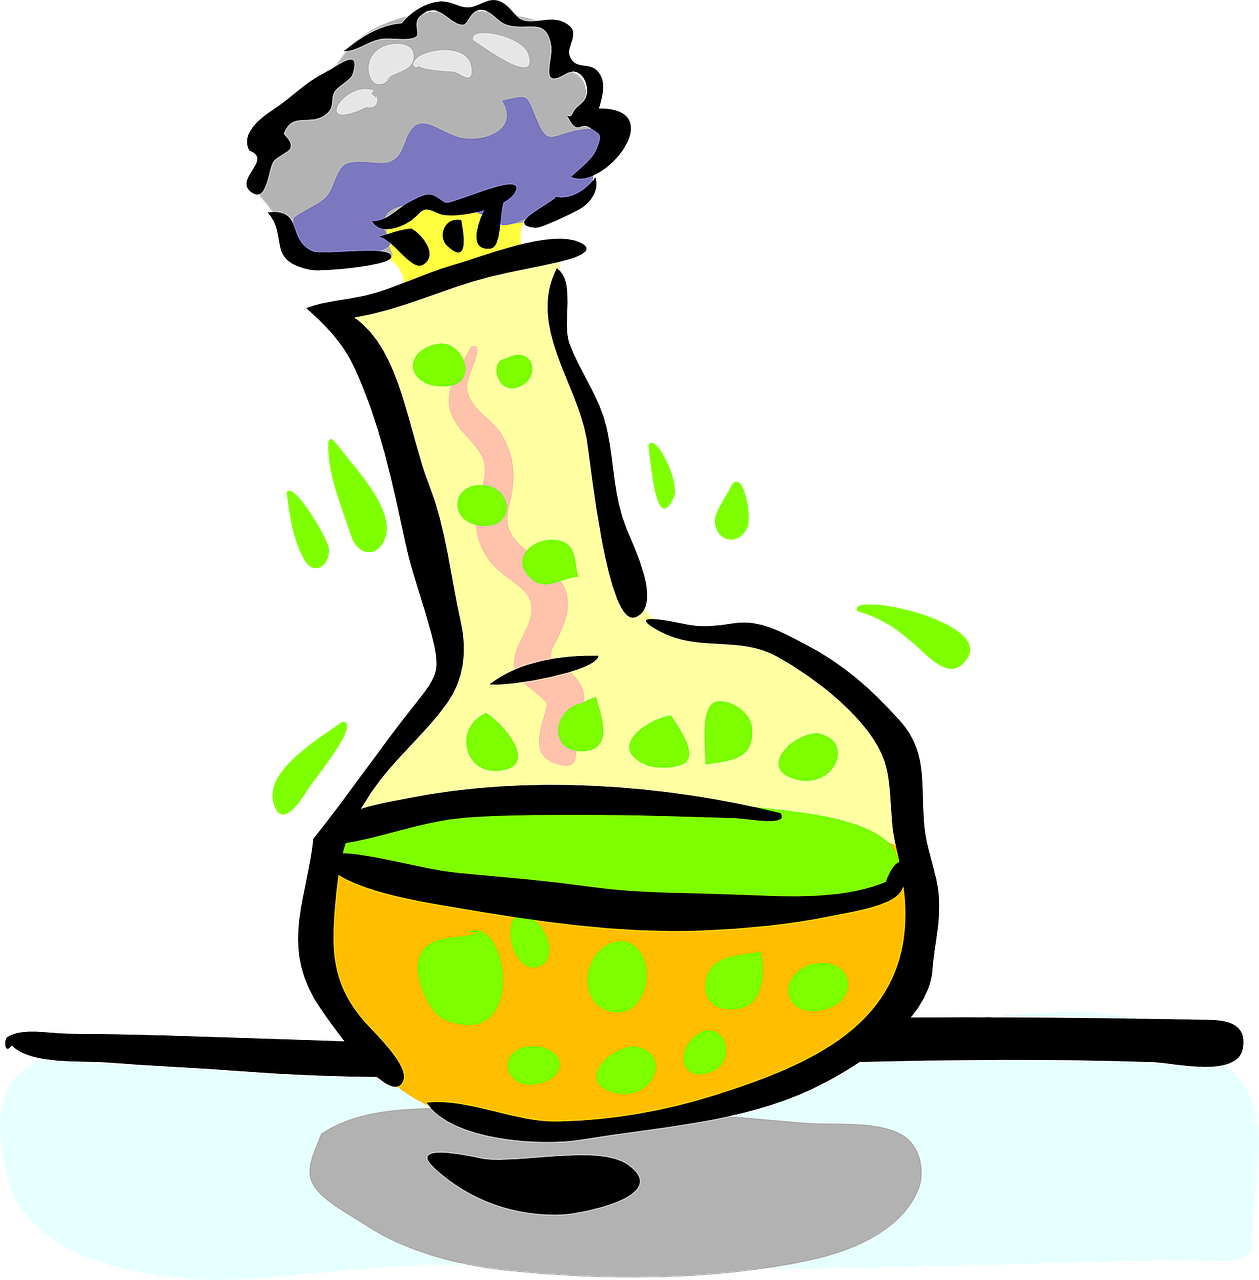 chemical reaction,experiment,flask,round,smoke,chemical,science,bottle,chemistry,explosion,acid,laboratory,equipment,explode,chemicals,lab,liquid,solution,reaction,reacting,heat,bubbles,free vector graphics,free pictures, free photos, free images, royalty free, free illustrations, public domain